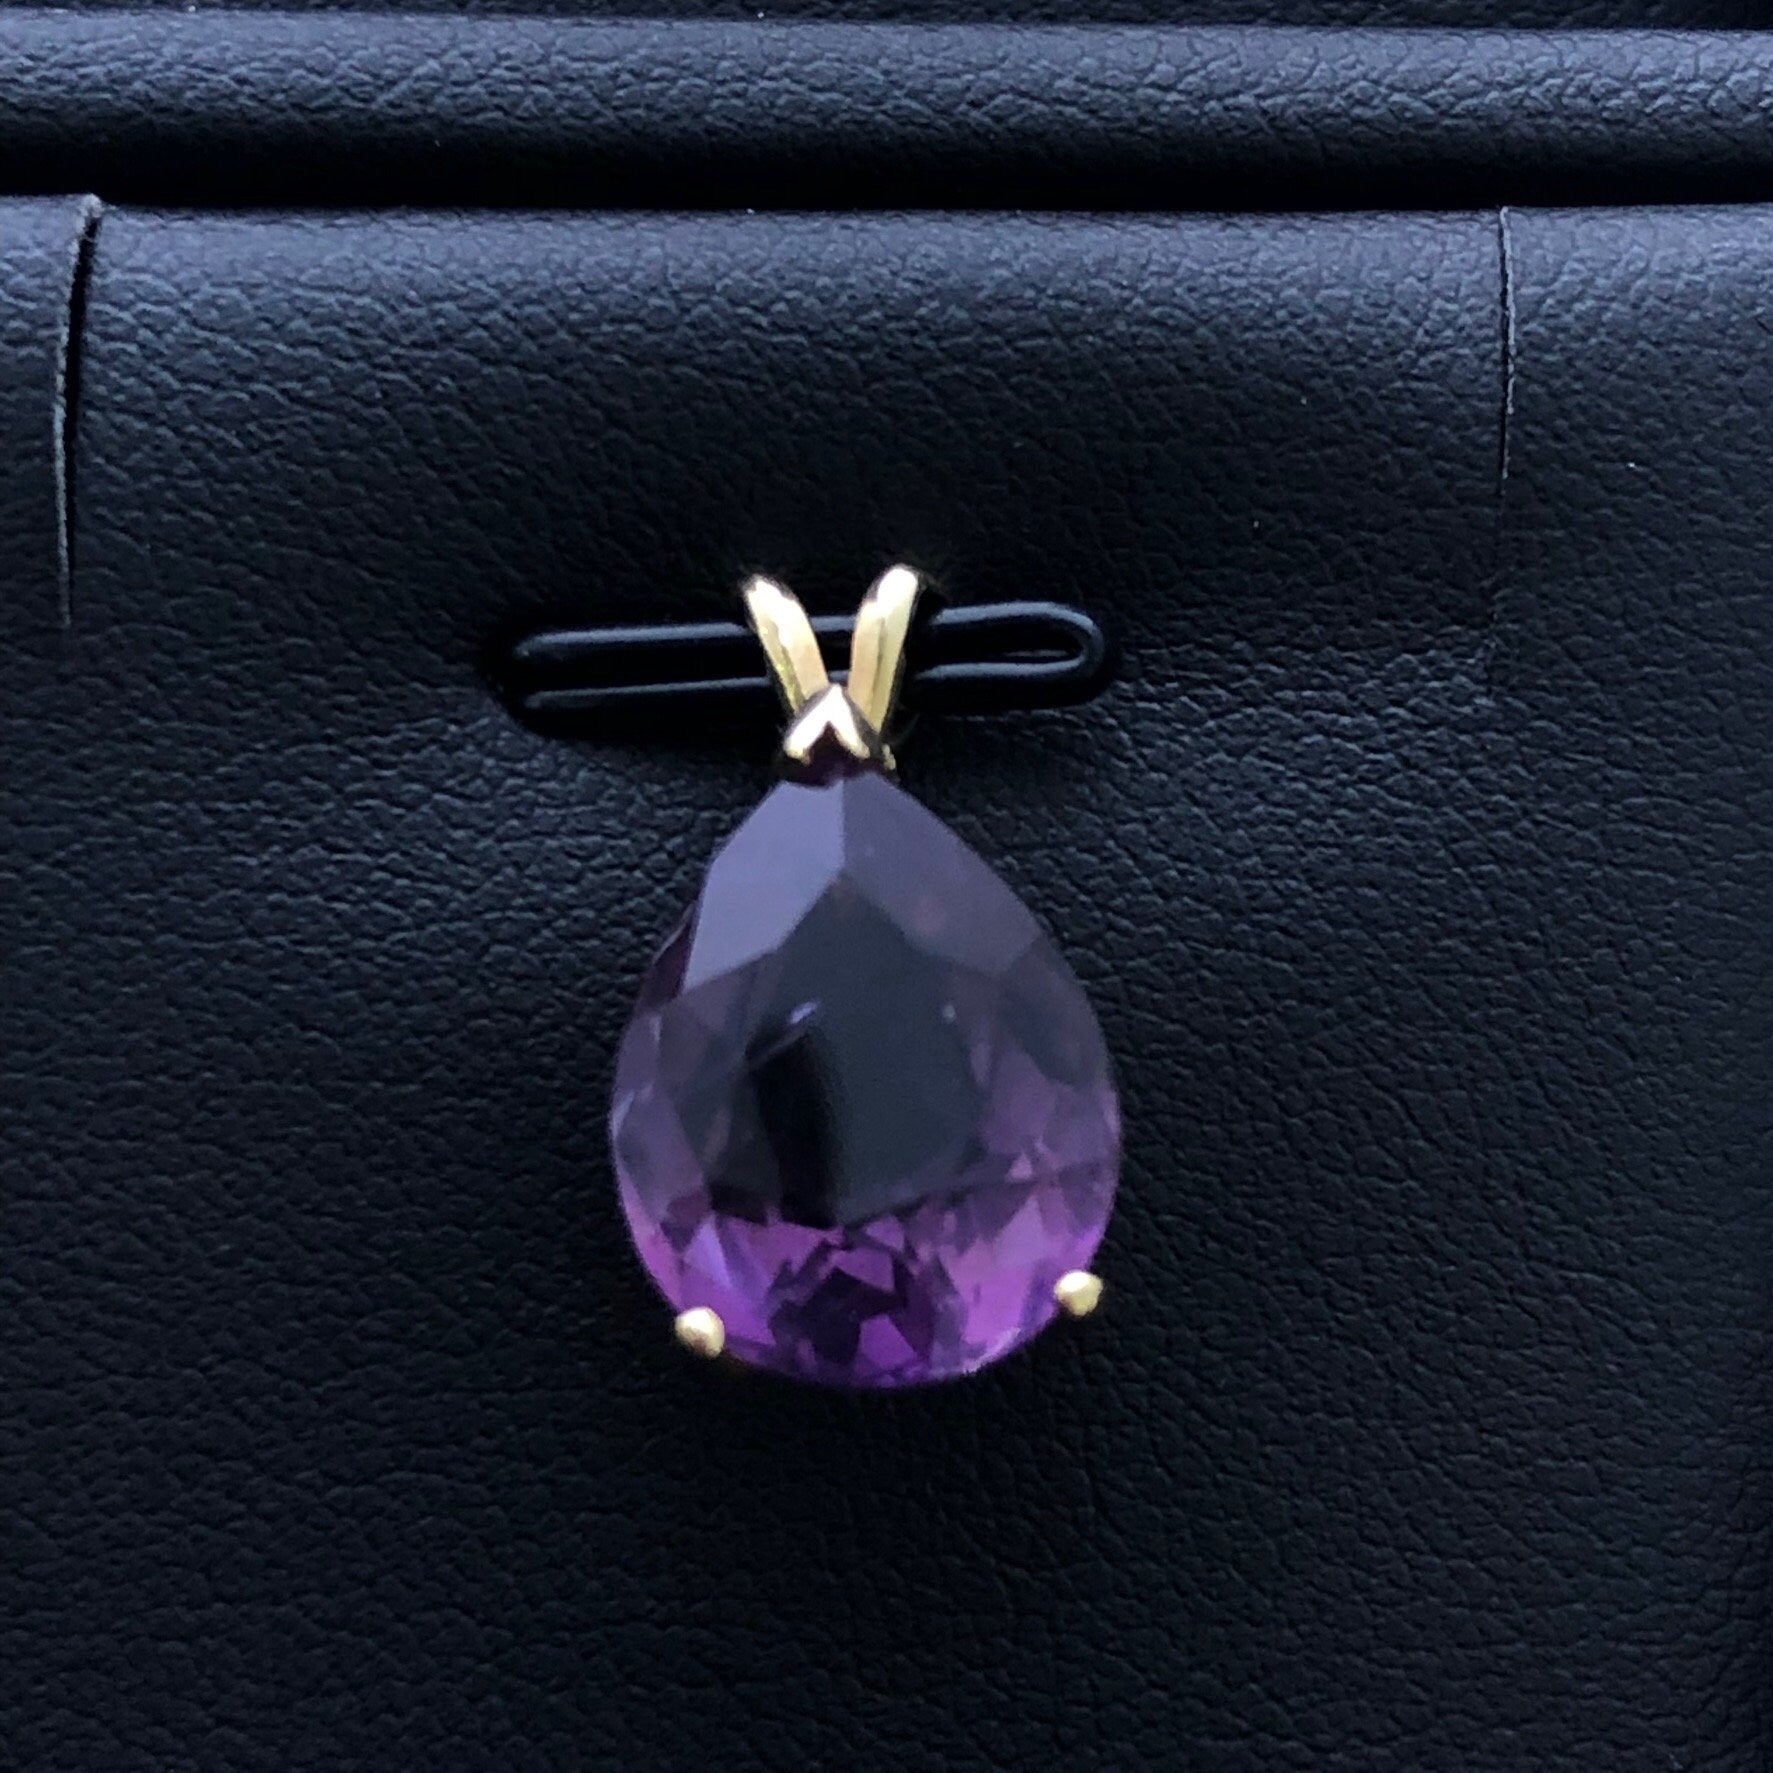 LIV 14k Yellow Gold & Purple Amethyst Large Pear Solitaire Pendant Necklace Gift